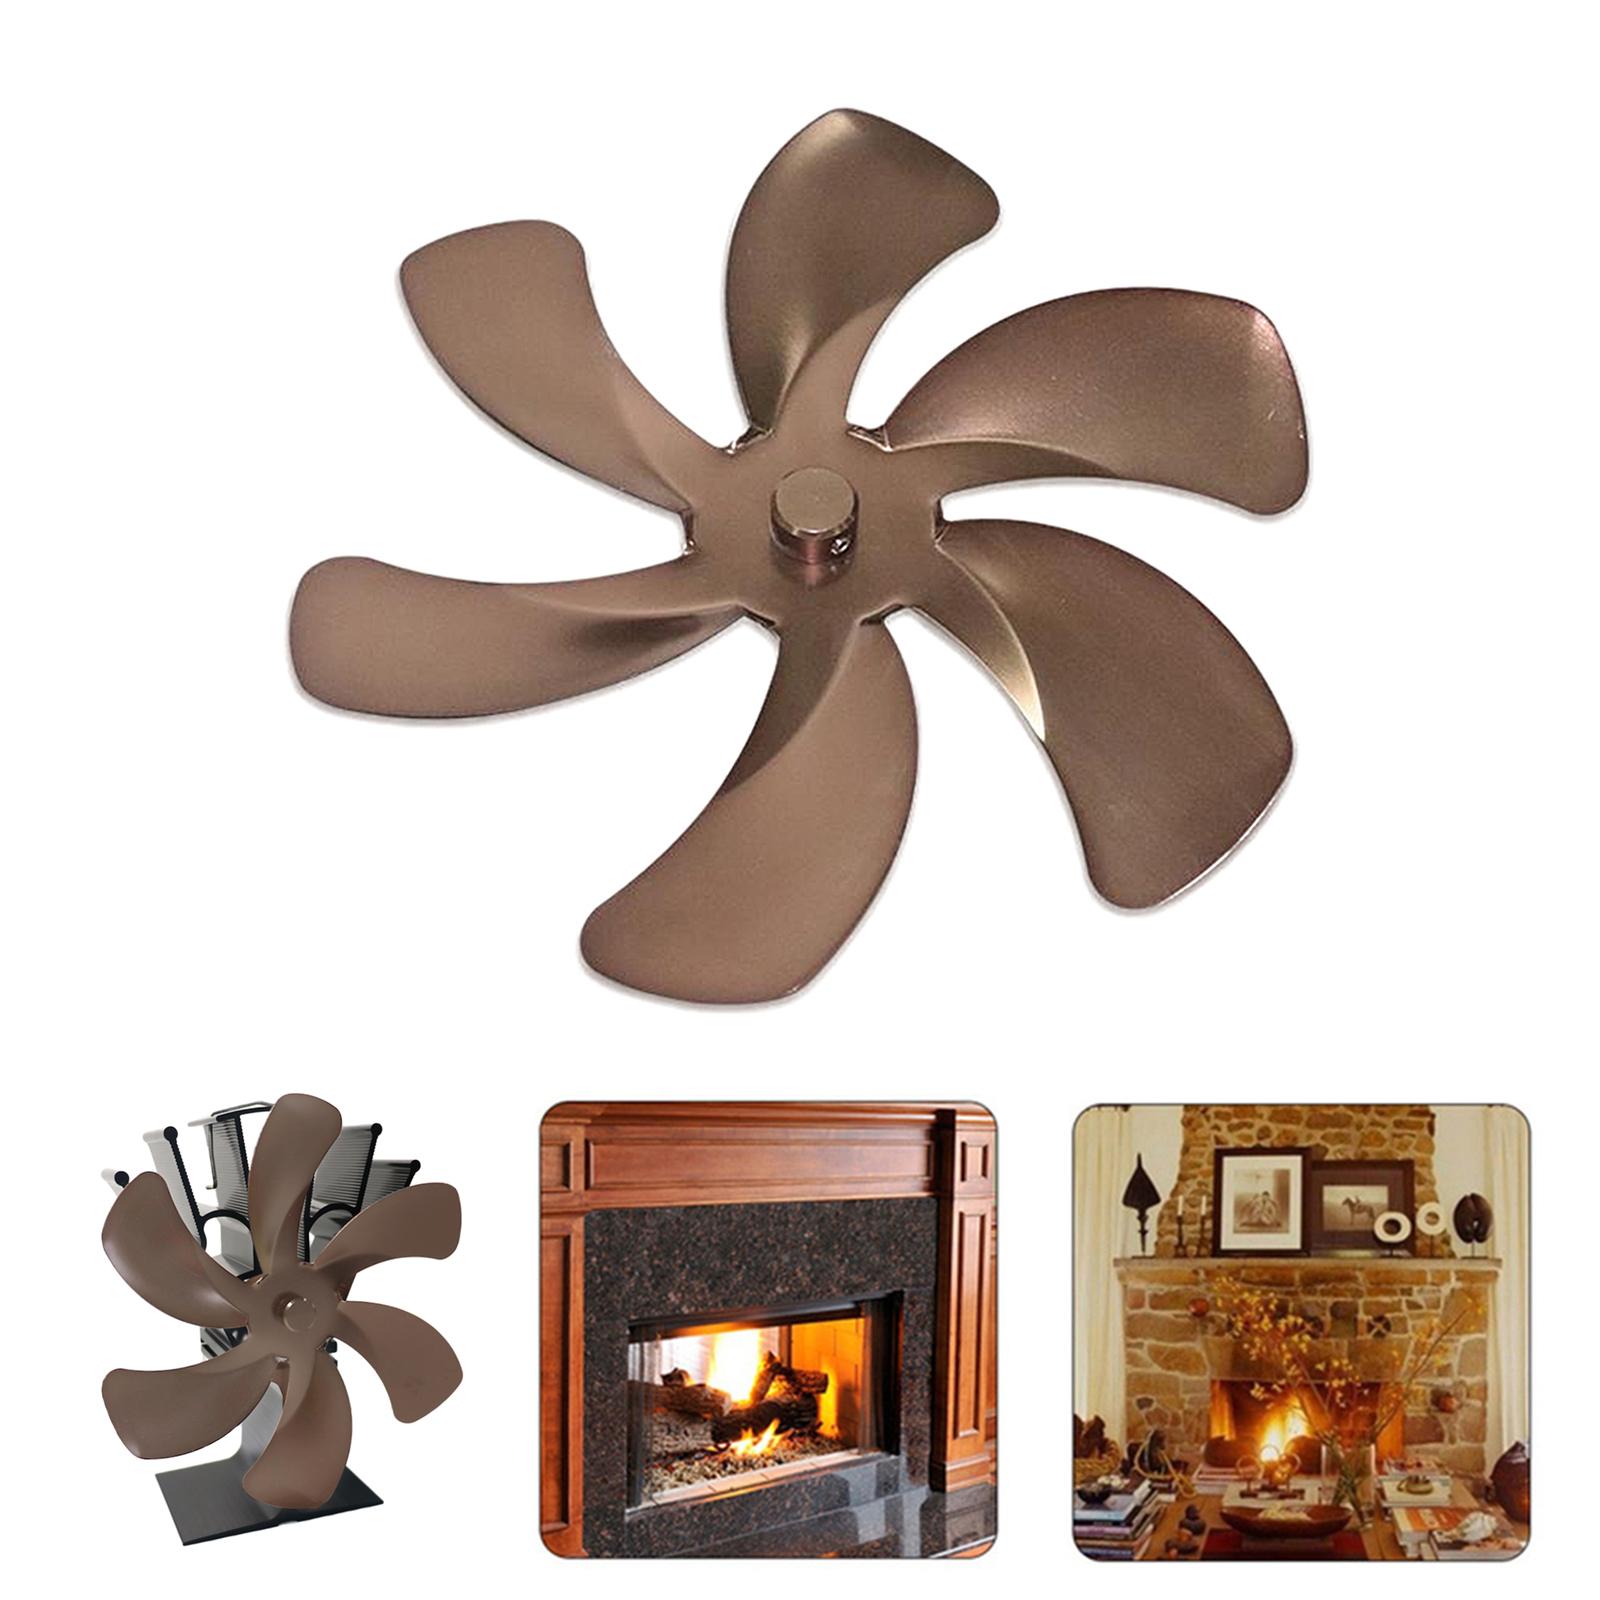 Universal Fireplace Fan Replacement Blades 6-Blade Burning Fan Blades Brown